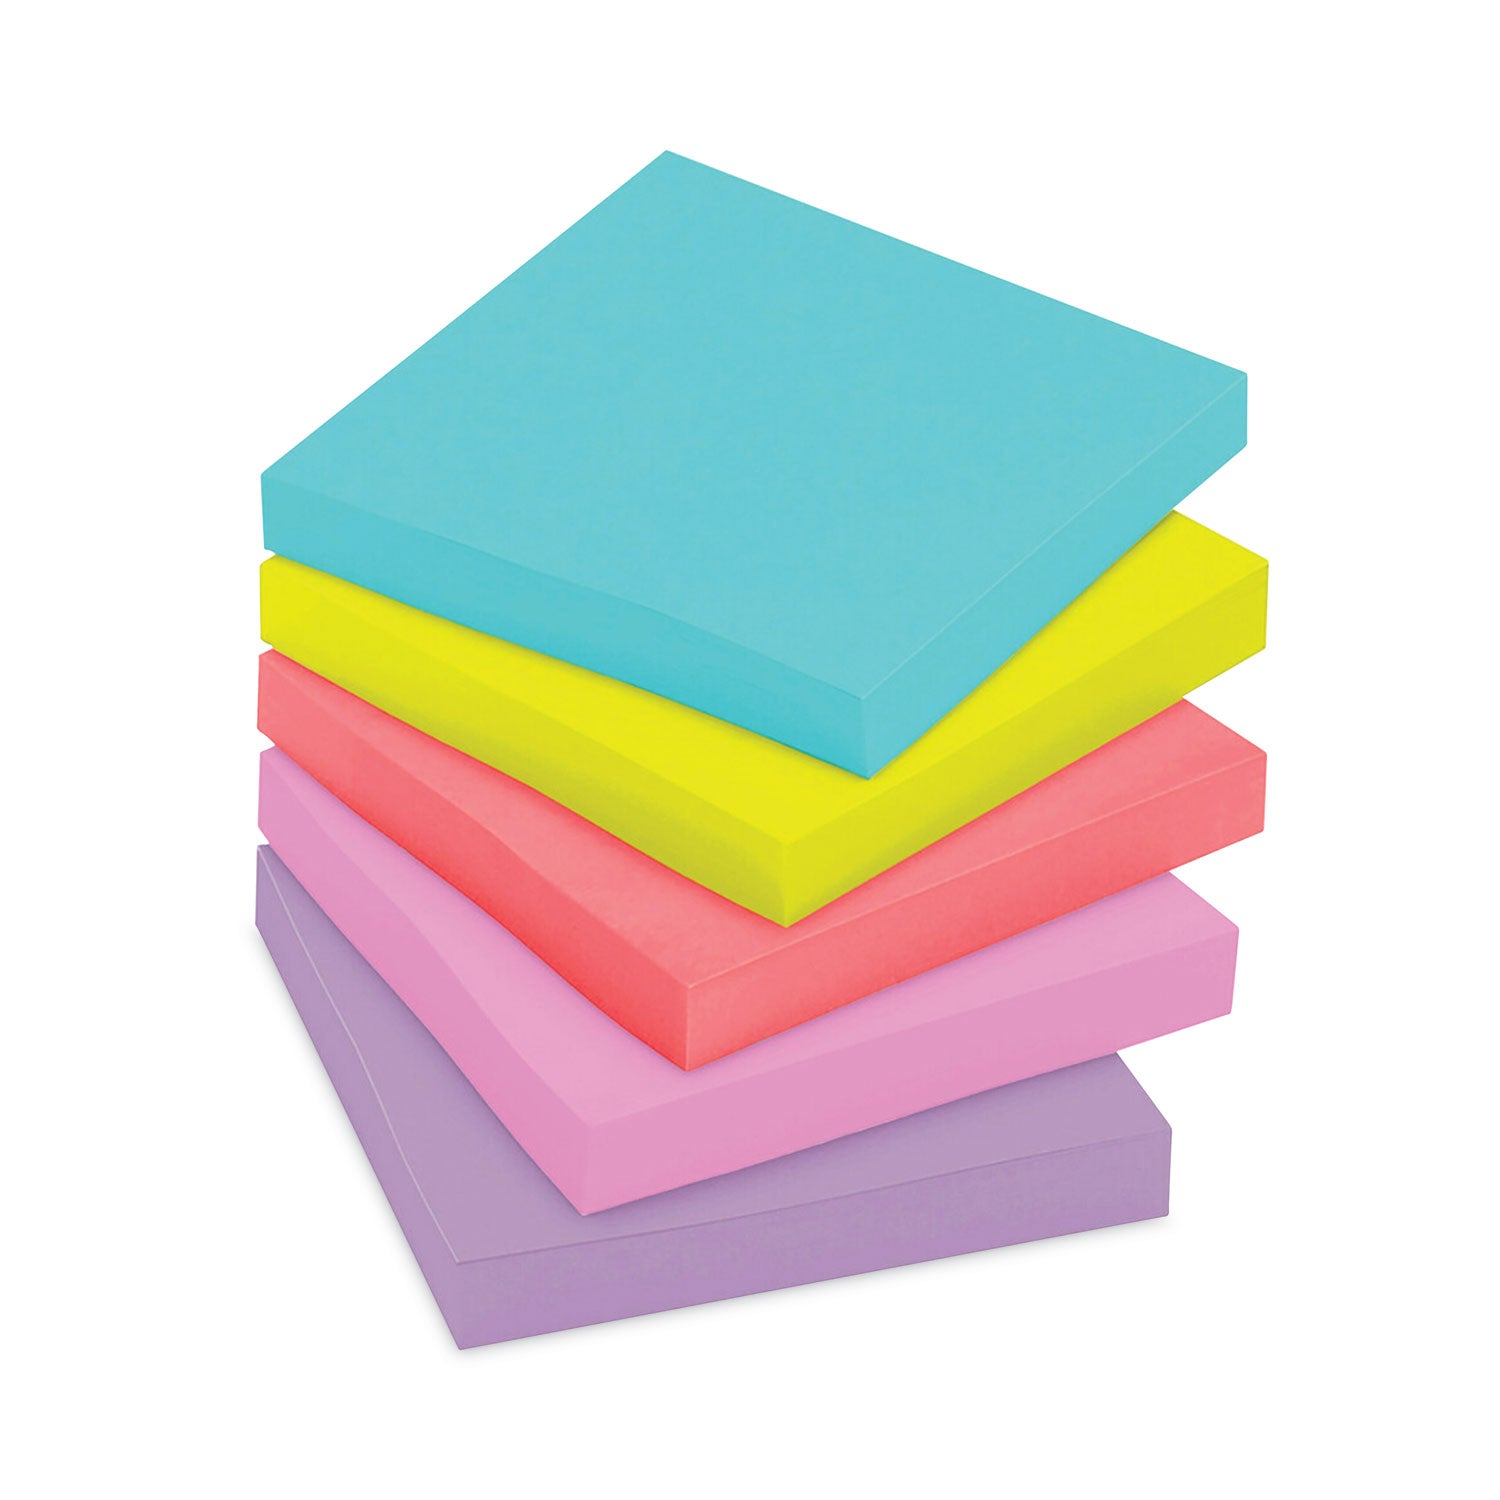 pads-in-supernova-neon-collection-colors-cabinet-pack-3-x-3-70-sheets-pad-24-pads-pack_mmm65424ssmiacp - 2